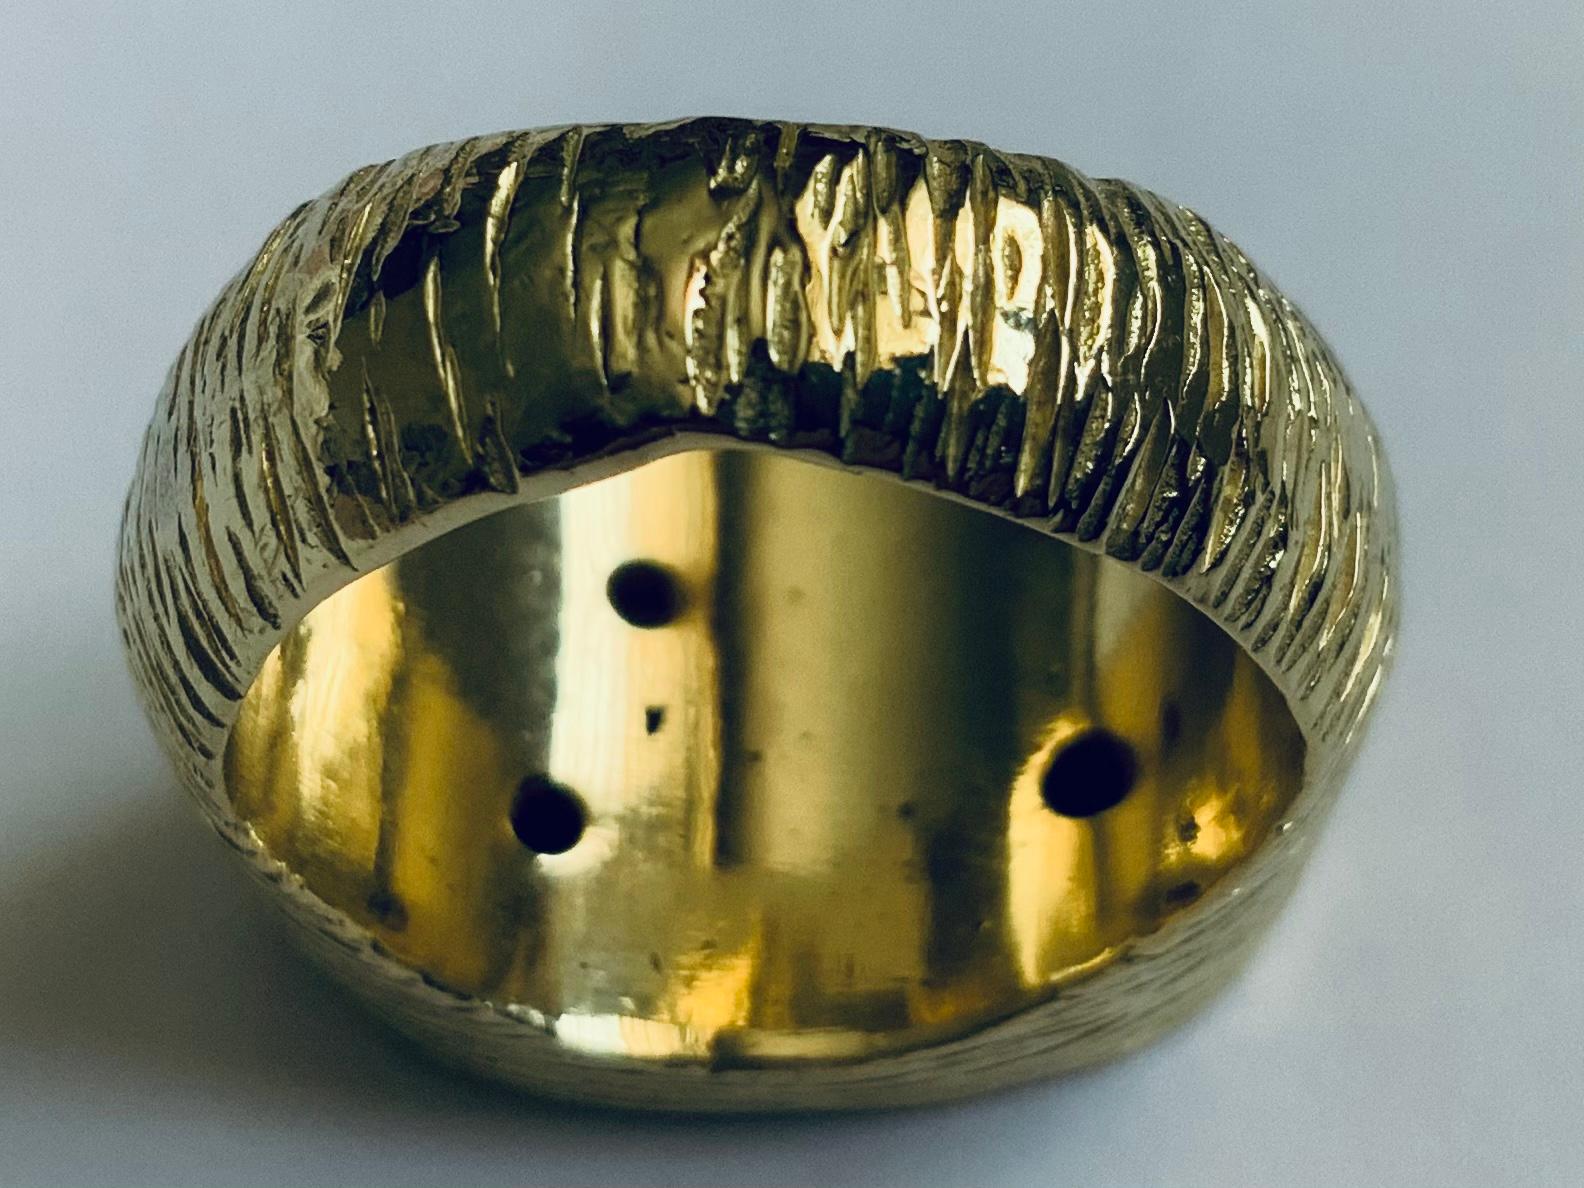 This is an 18K Yellow Gold Diamonds Men Ring. The ring has three round diamonds ( 7 pt each one ) embedded and adorning an oval gold rocky top surface of the ring. The shanks of the ring have a Florentine texture like. They are mount made in 18K